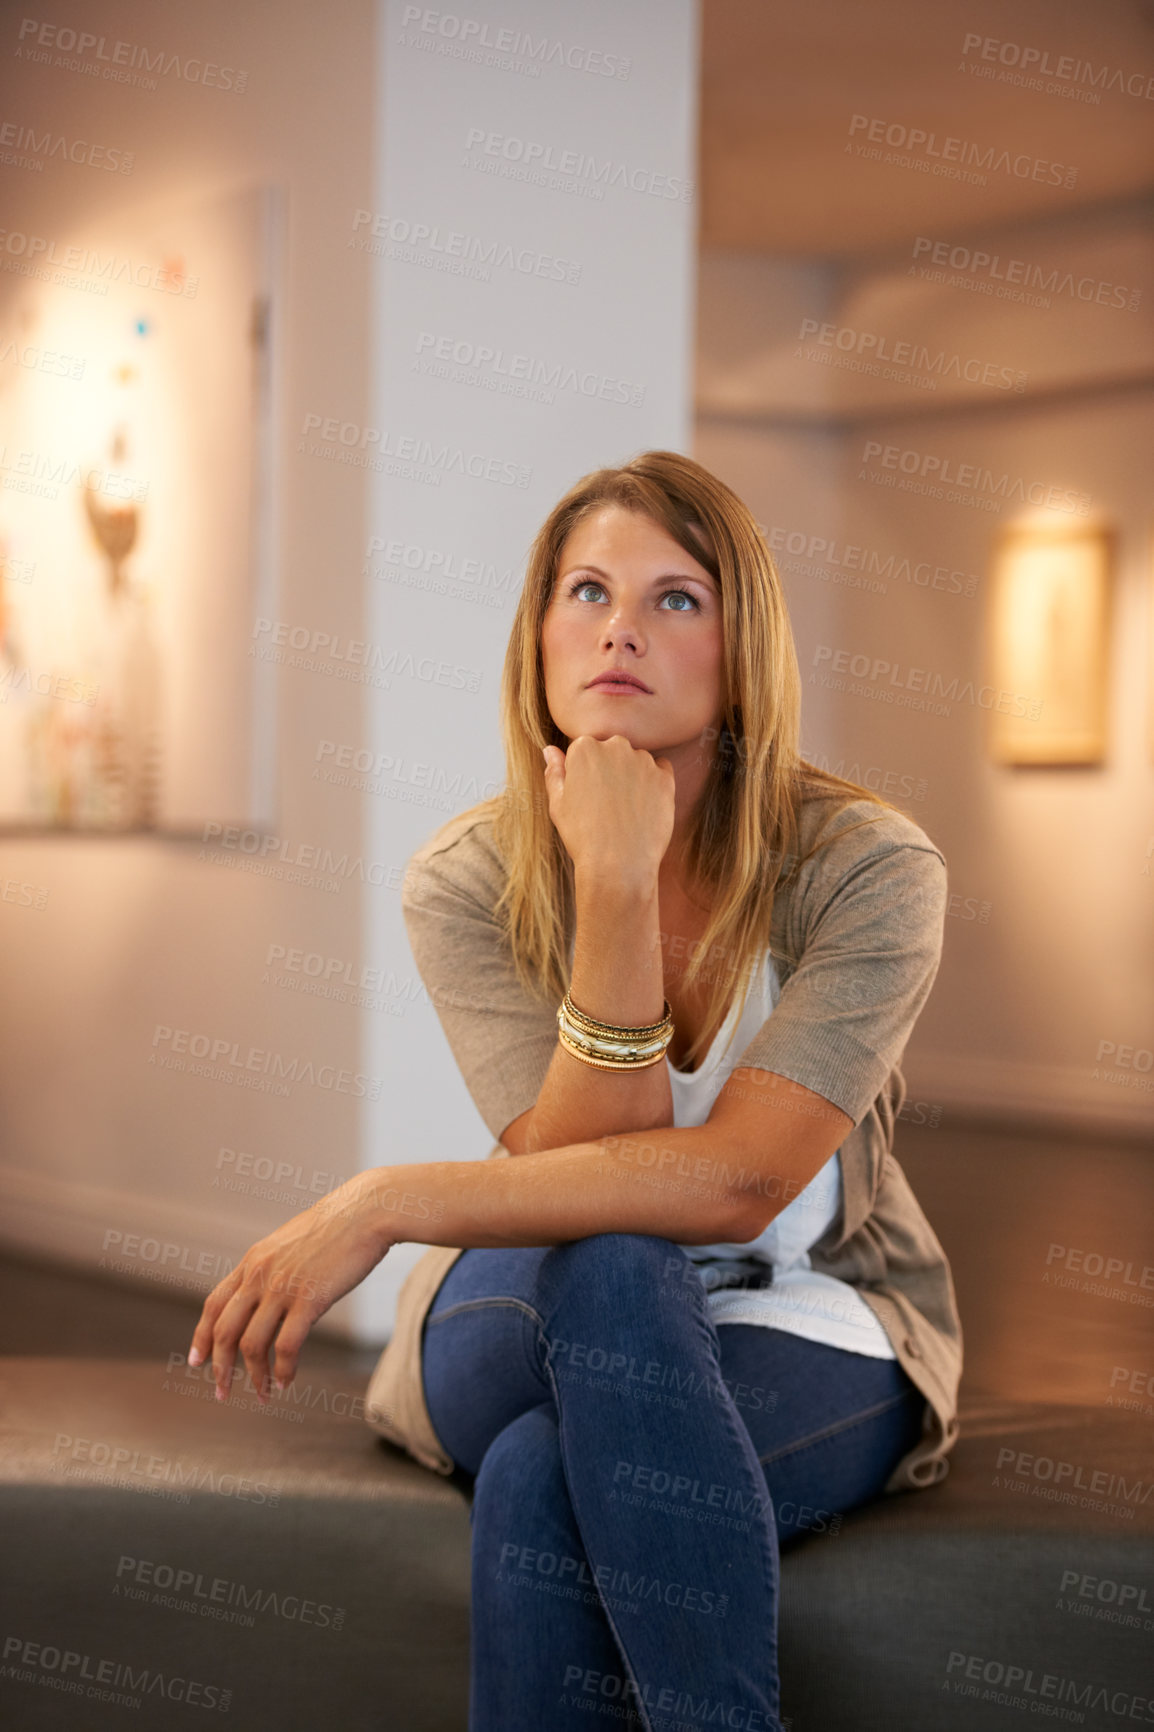 Buy stock photo Thinking, creative and woman at a gallery for art, exhibition or education on culture. Idea, studying and a girl looking at creativity or paintings in a museum for inspiration, learning or collection